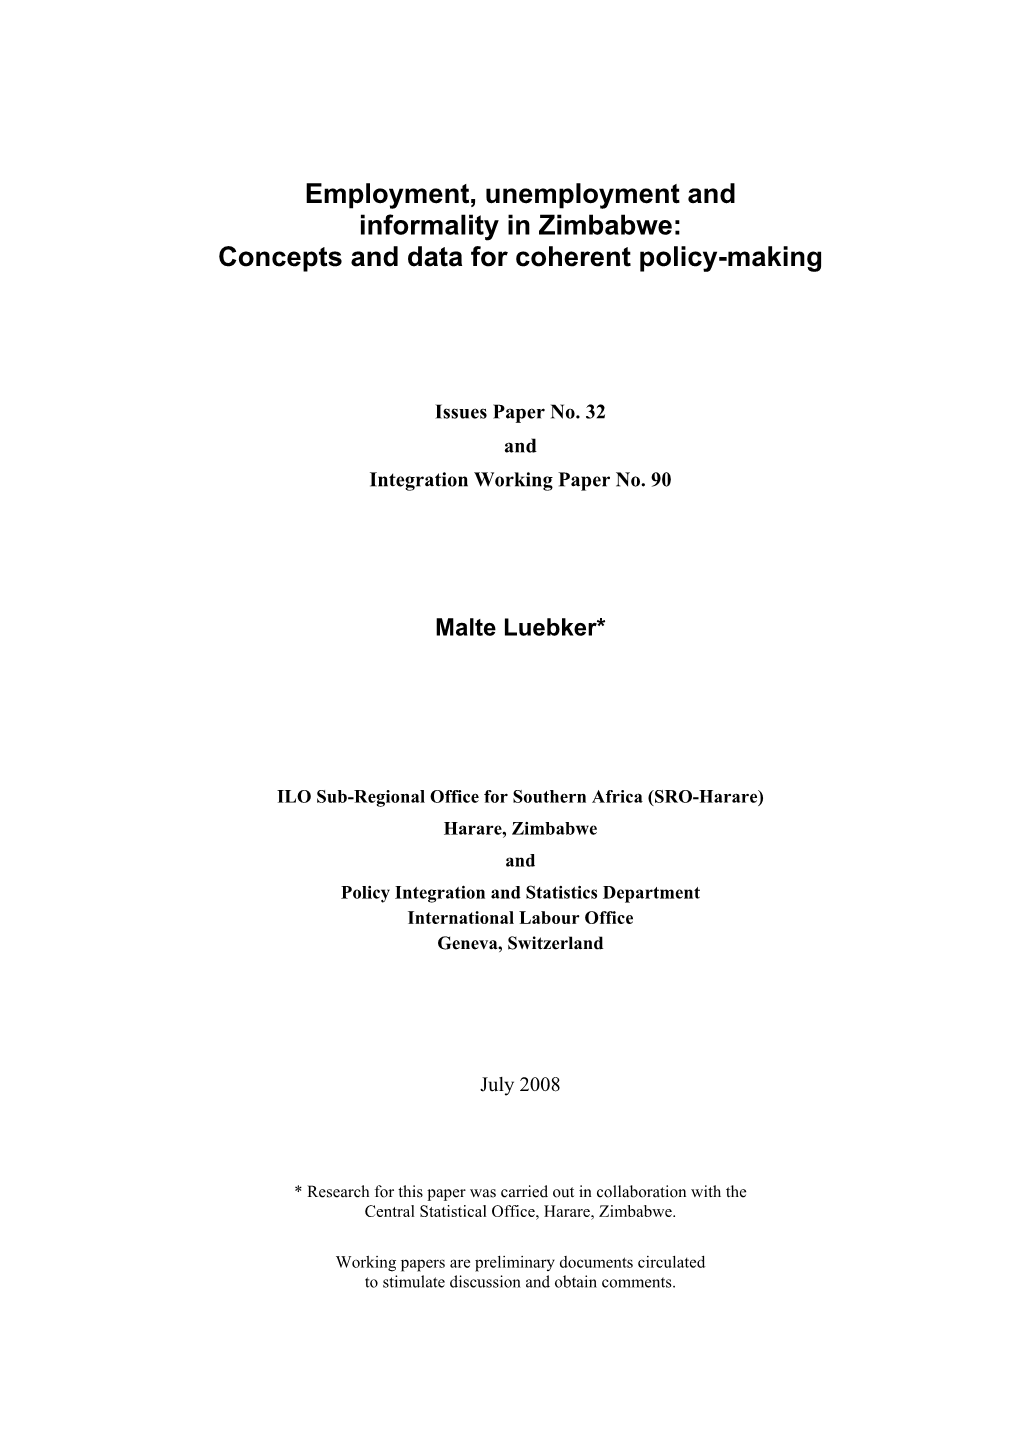 Employment, Unemployment and Informality in Zimbabwe: Concepts and Data for Coherent Policy-Making